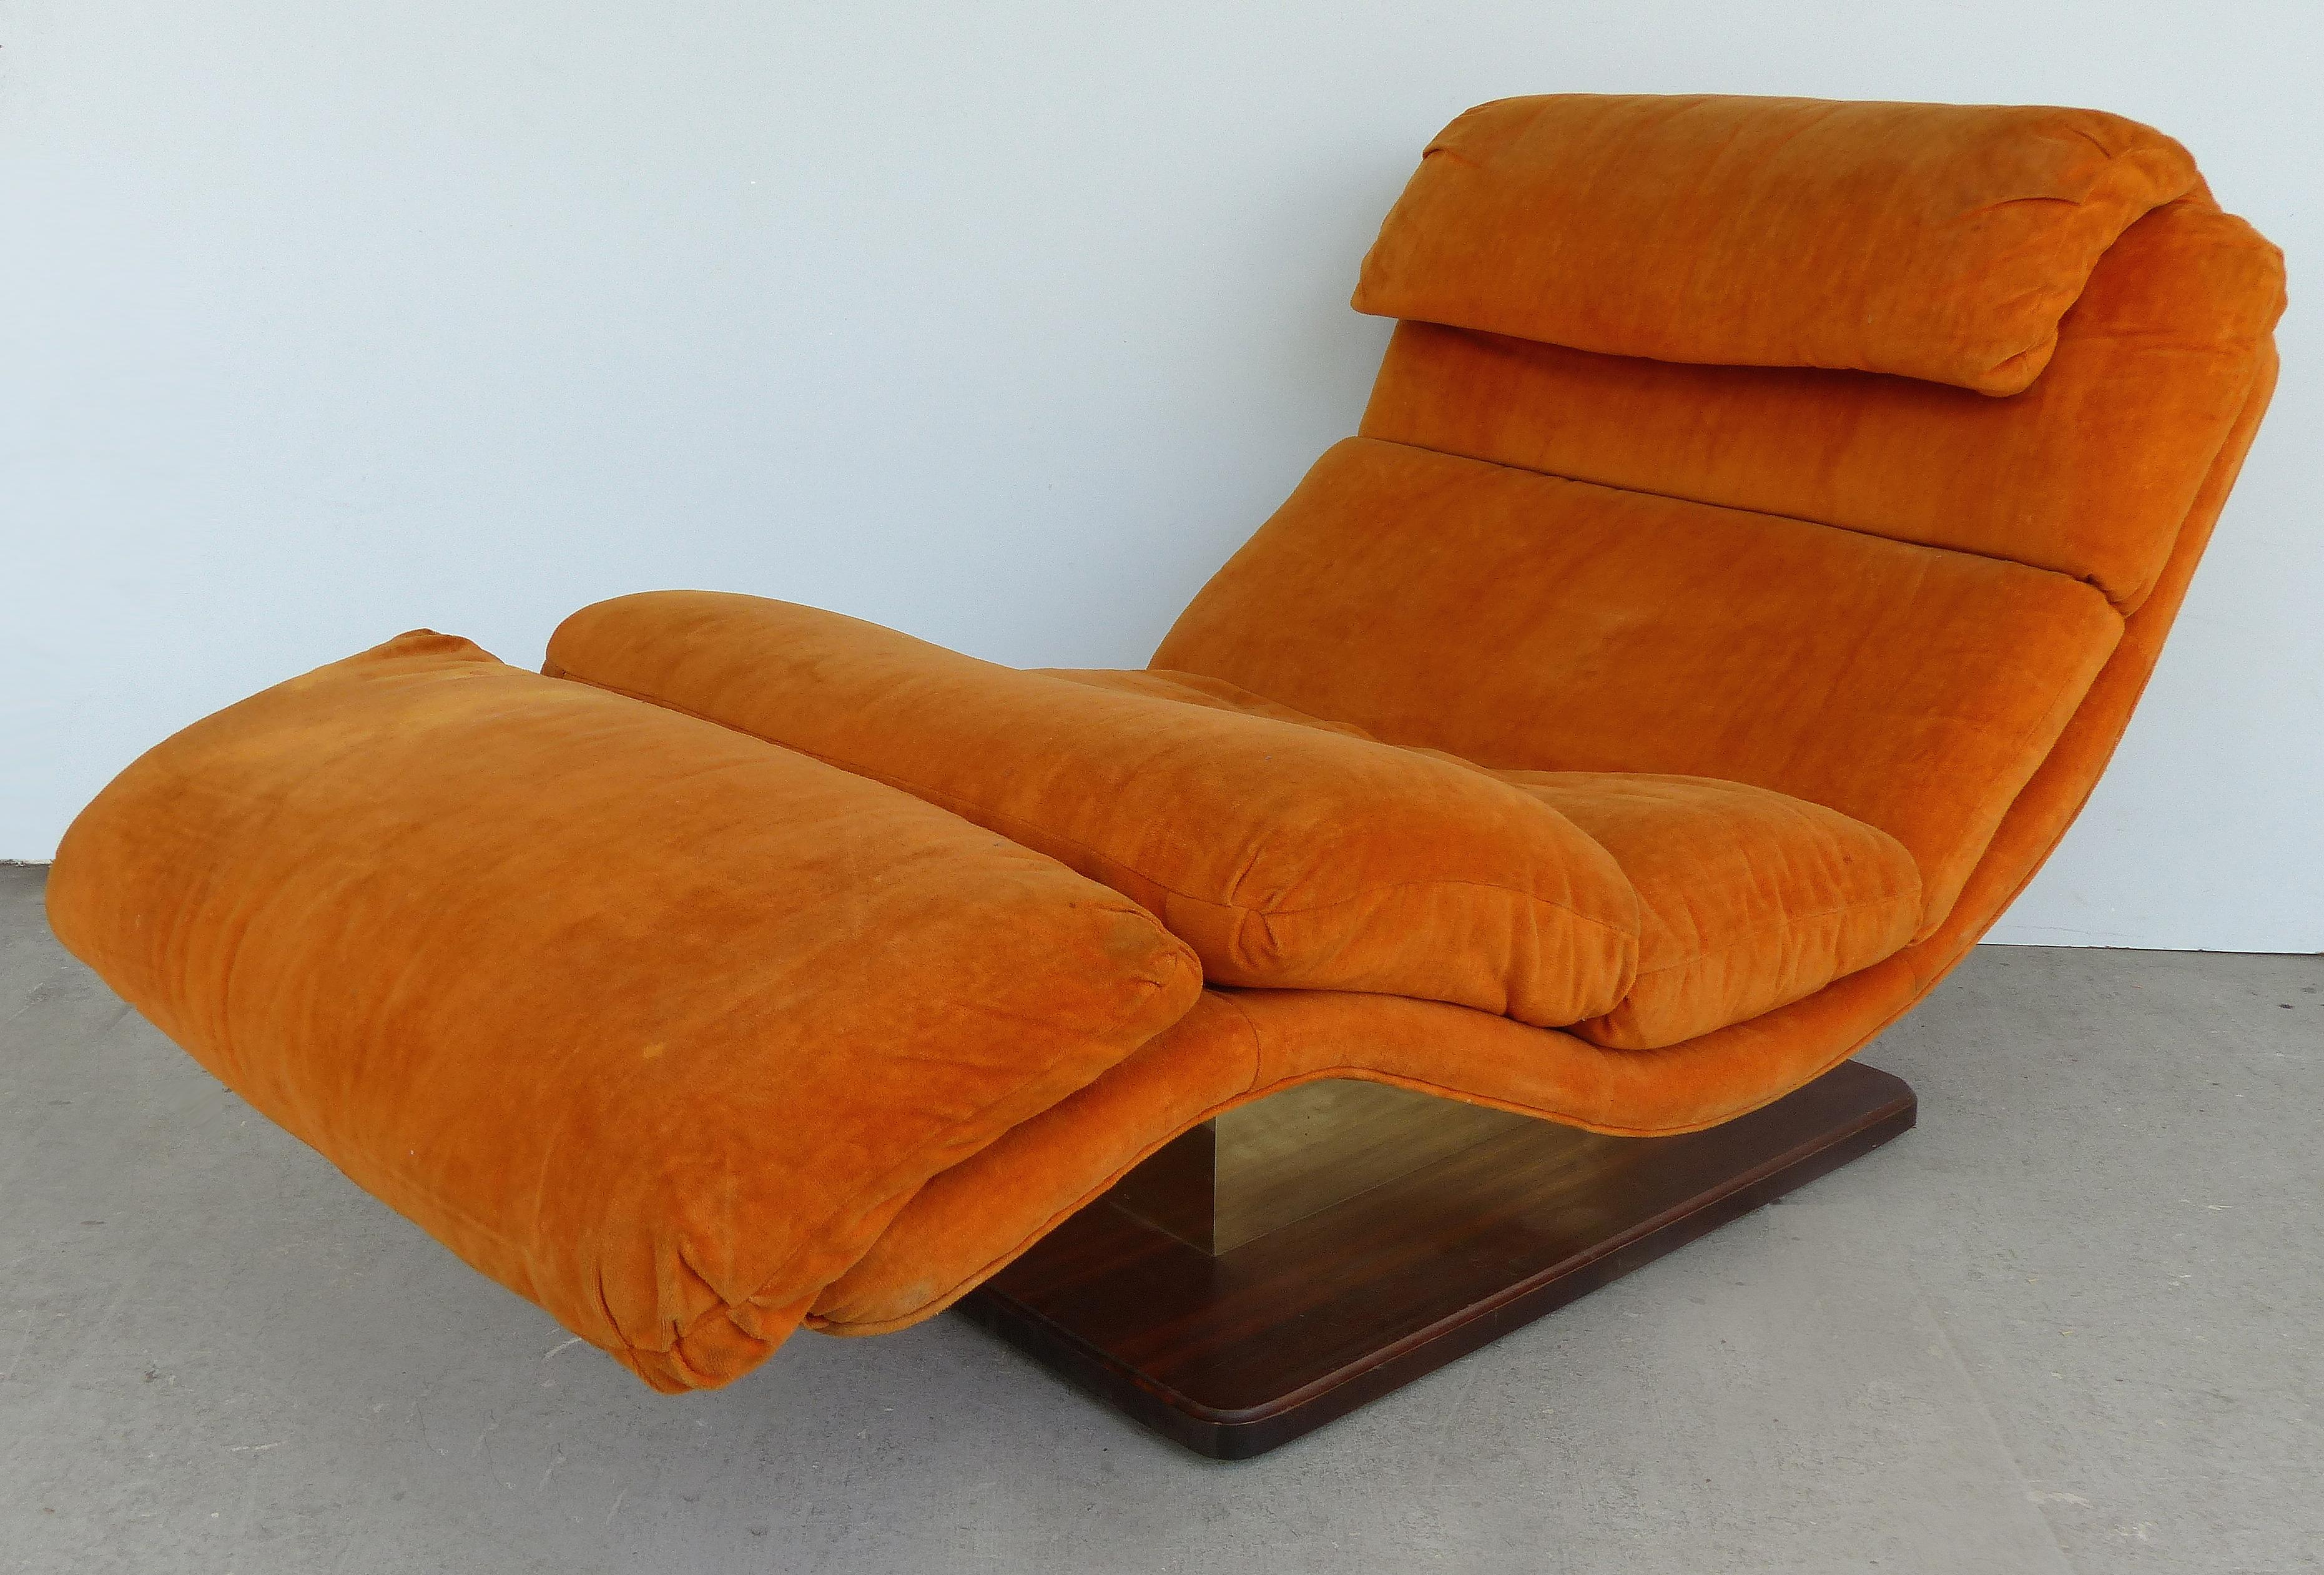 Offered for sale is a stylish Mid-Century Modern chaise longue by Carson's of High Point., N.C. An ultra-comfortable wave chaise longue after Milo Baughman with an S-shaped, generously wide design with a brass and walnut floating base. Upholstery